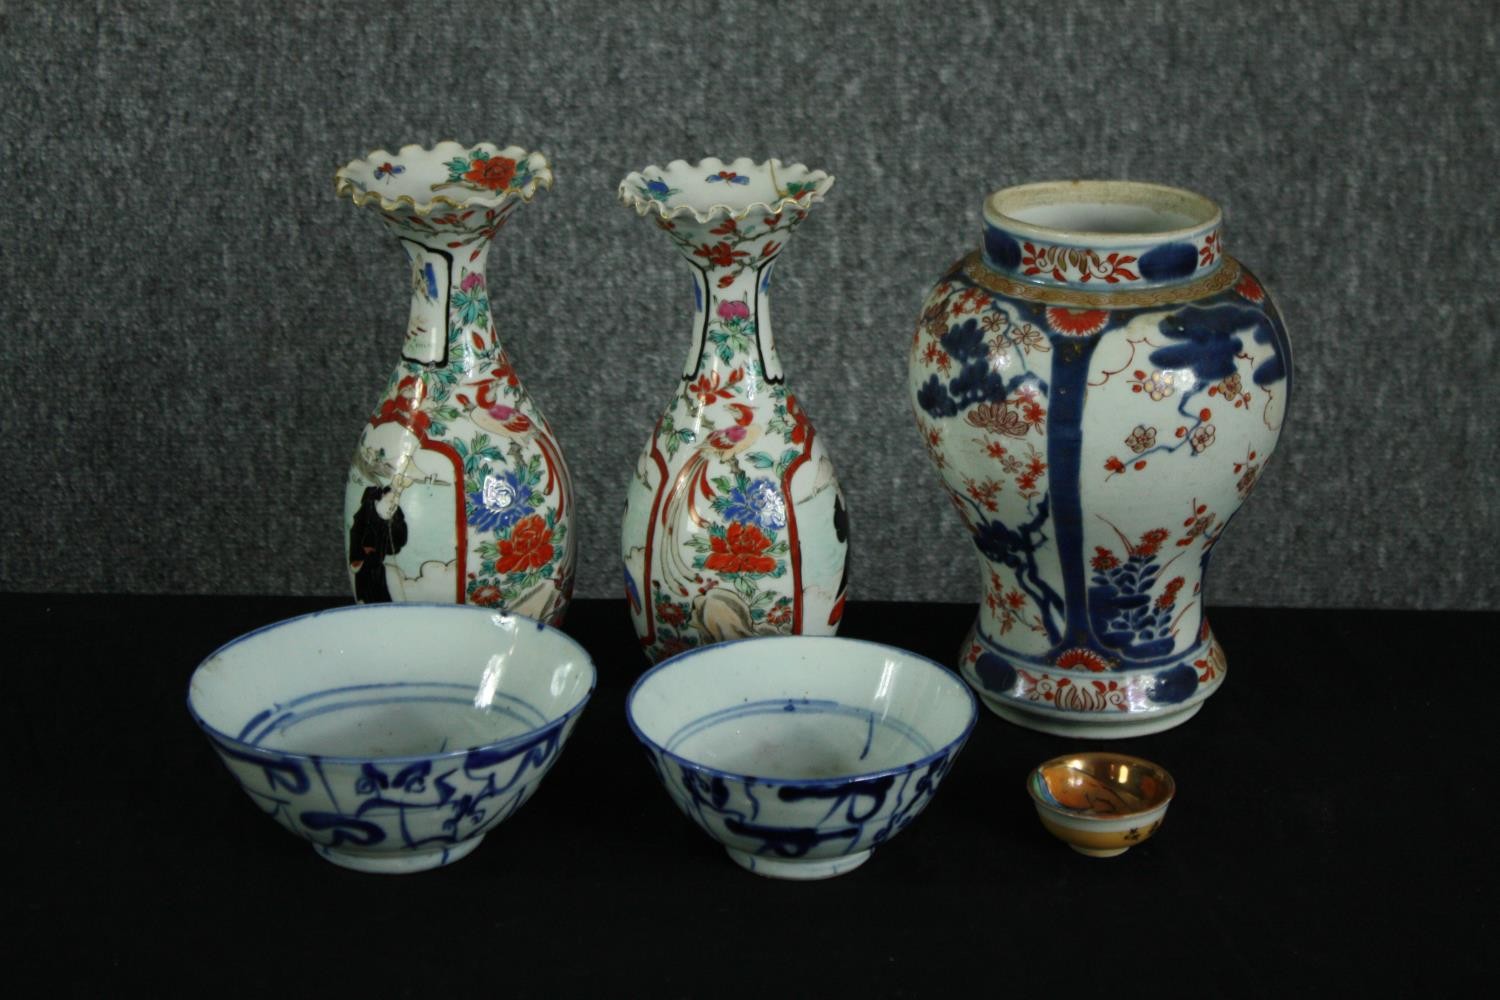 A collection of Japanese and Chinese ceramics, including a pair of gourd shaped hand painted vases